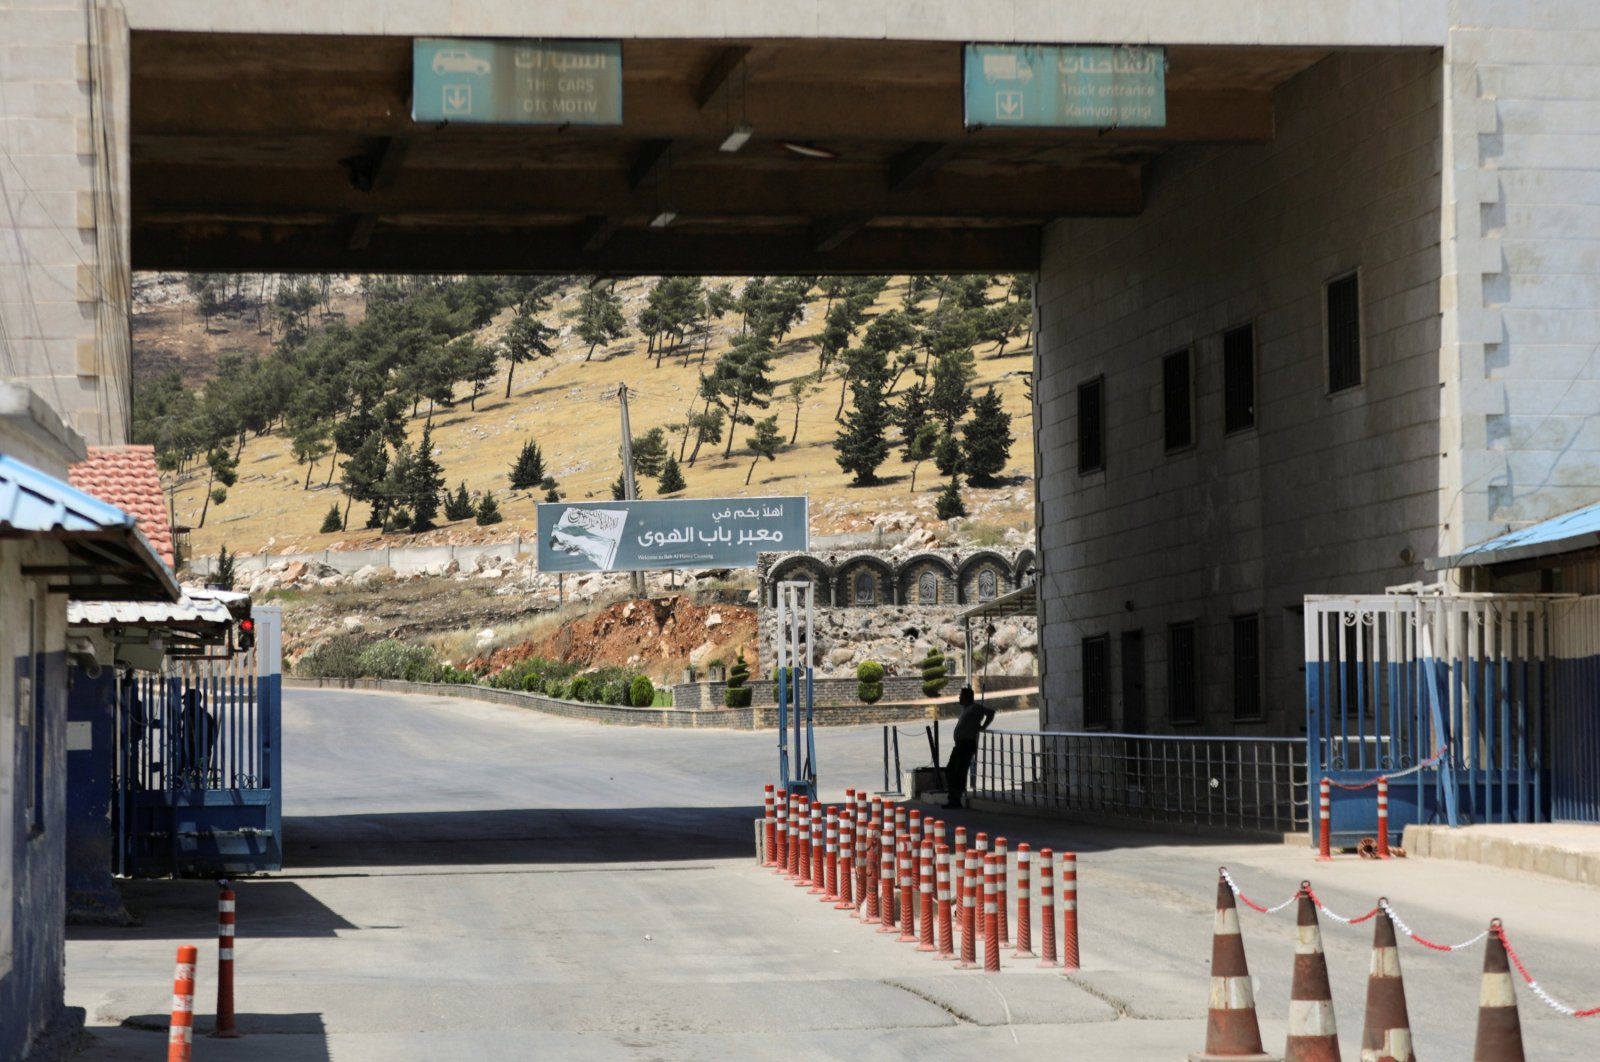 A road sign that reads "Welcome to Bab al-Hawa crossing" is seen at Bab al-Hawa crossing at the Syrian-Turkish border, in Idlib governorate, northwestern Syria, June 10, 2021. (Reuters File Photo)